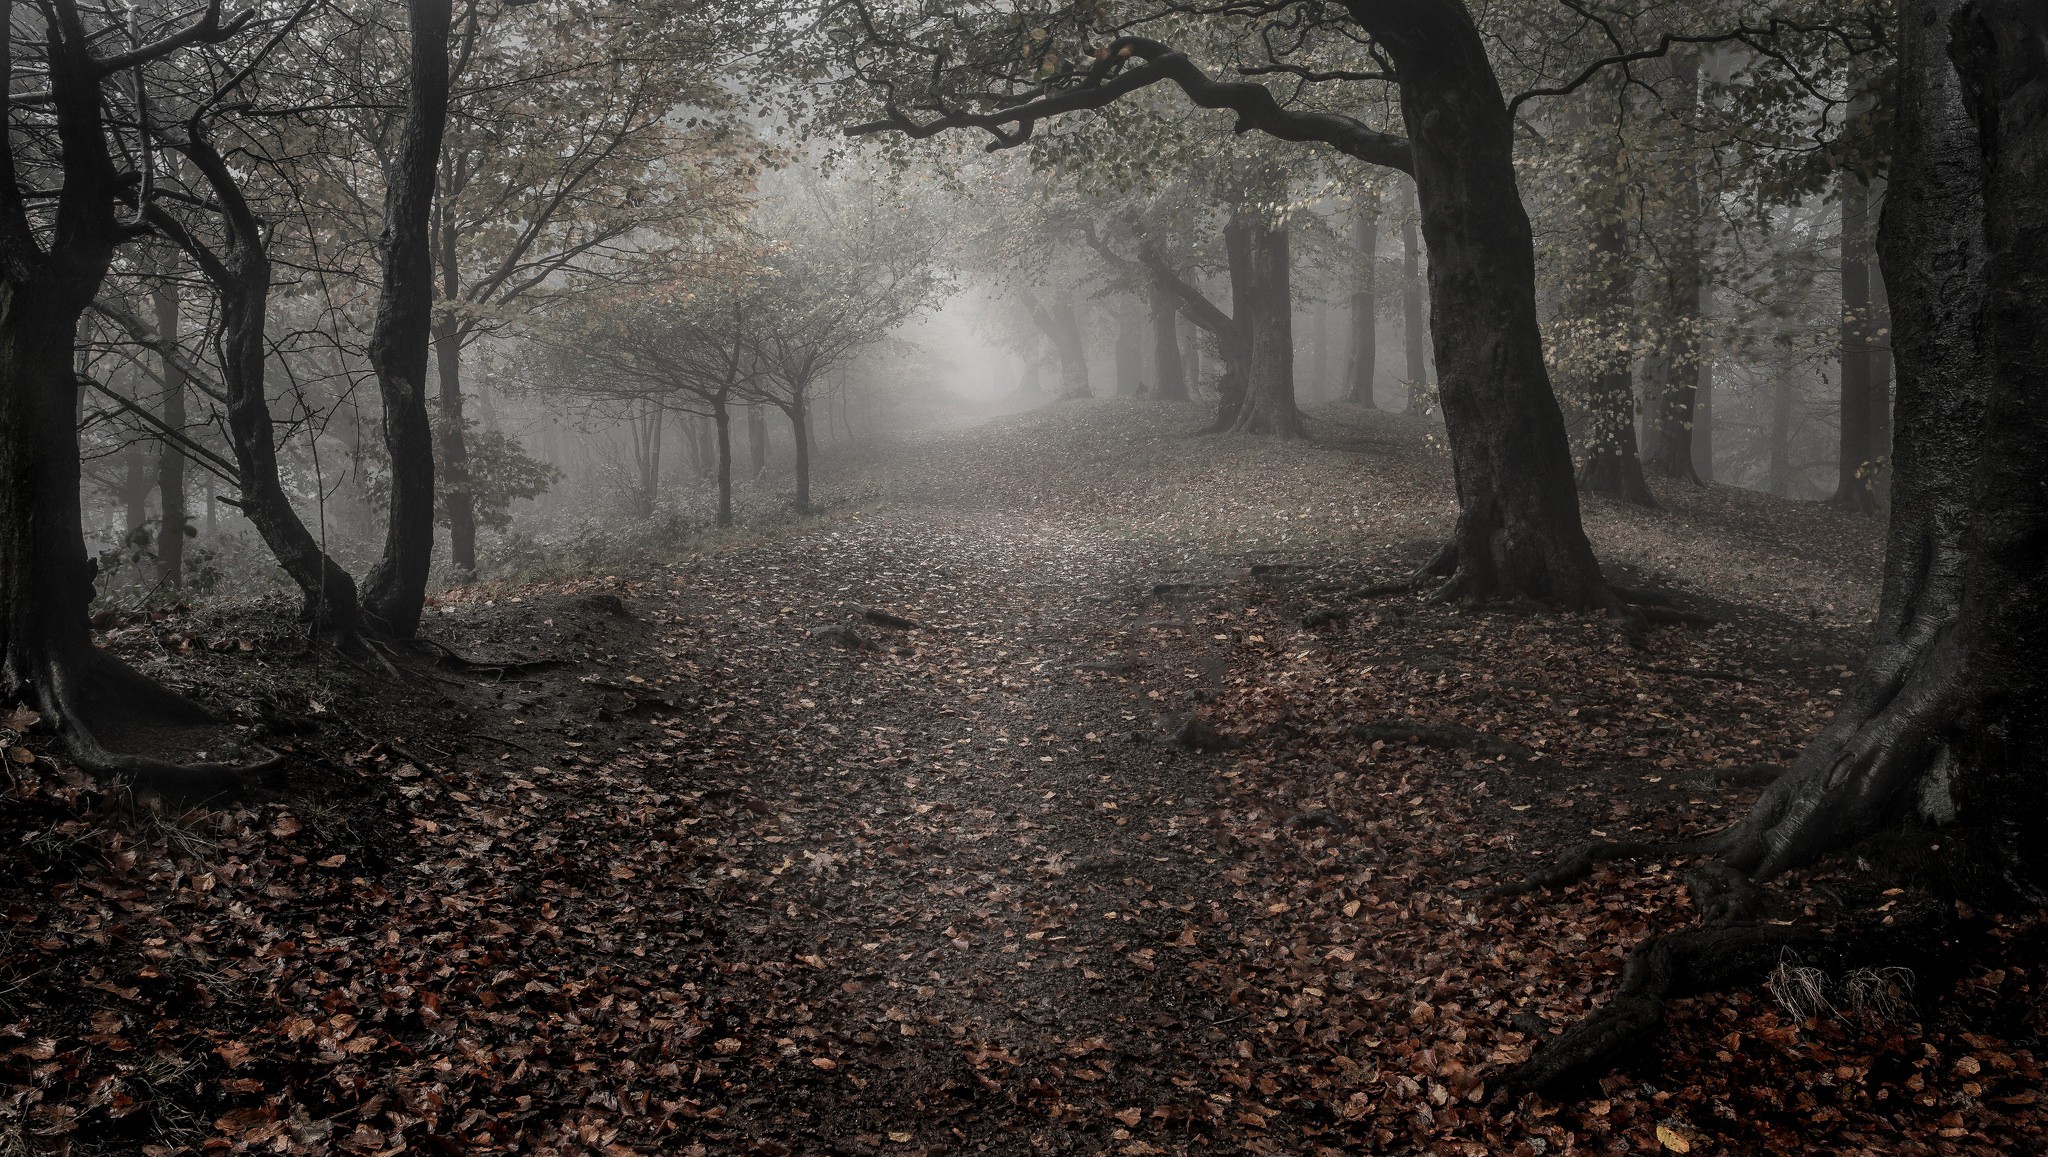 General 2048x1157 nature landscape trees wood forest mist leaves fall branch roots path gloomy